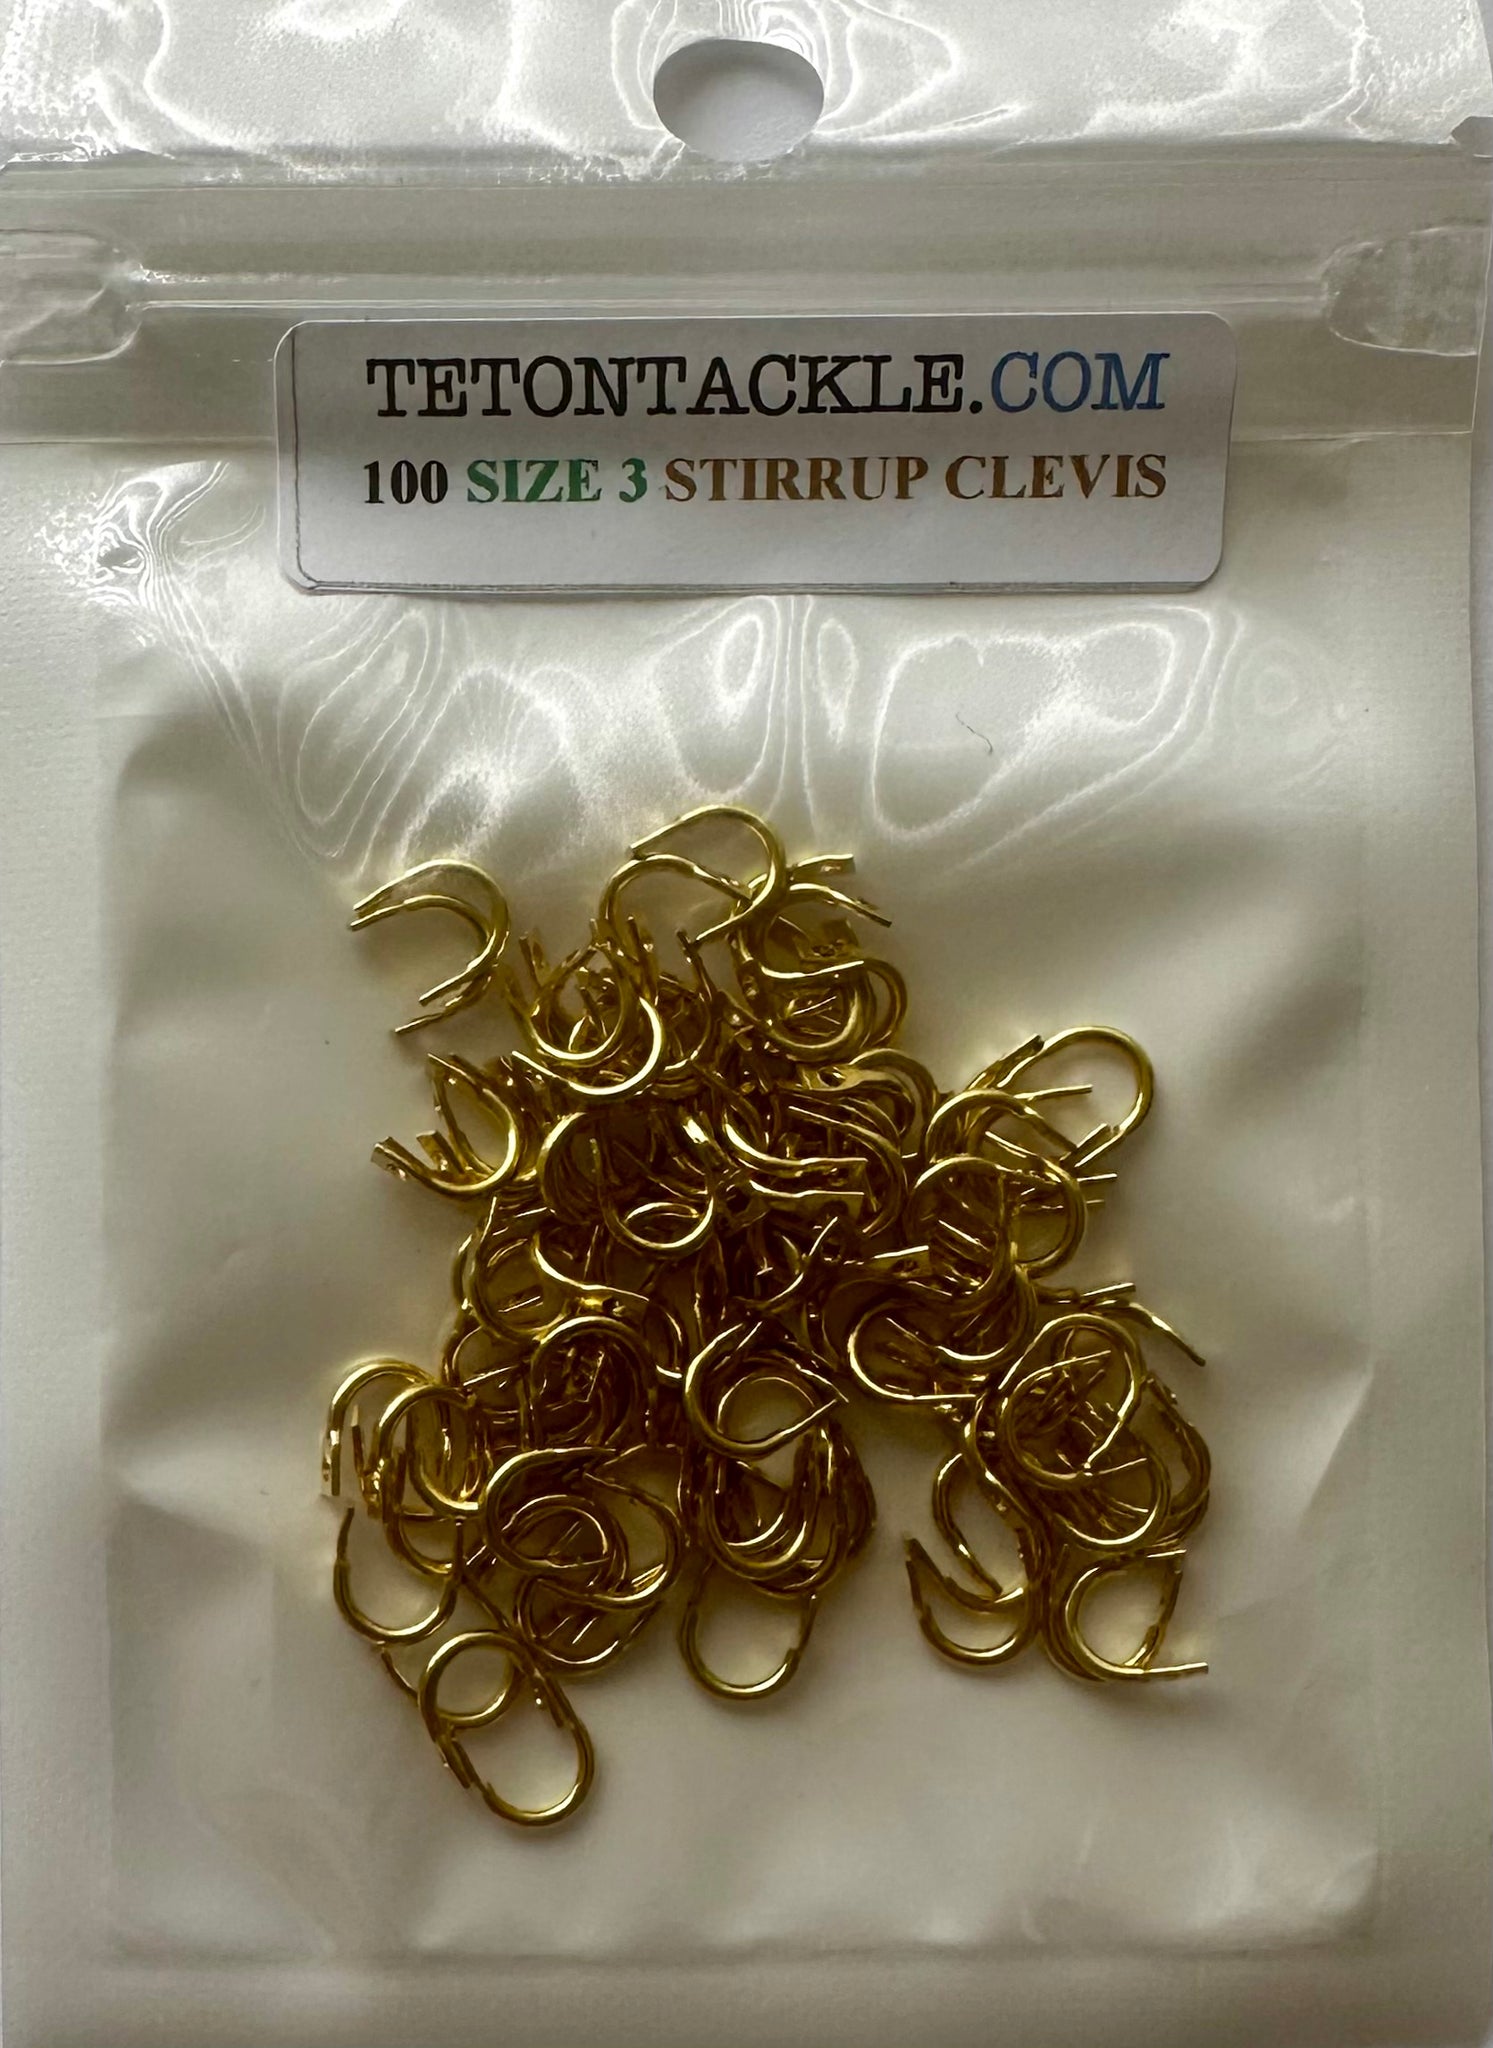 Clevis - 100- Size 3 Gold Stirrup Clevis' Regular Price $4.50 On Sale for a Limited Time $3.50